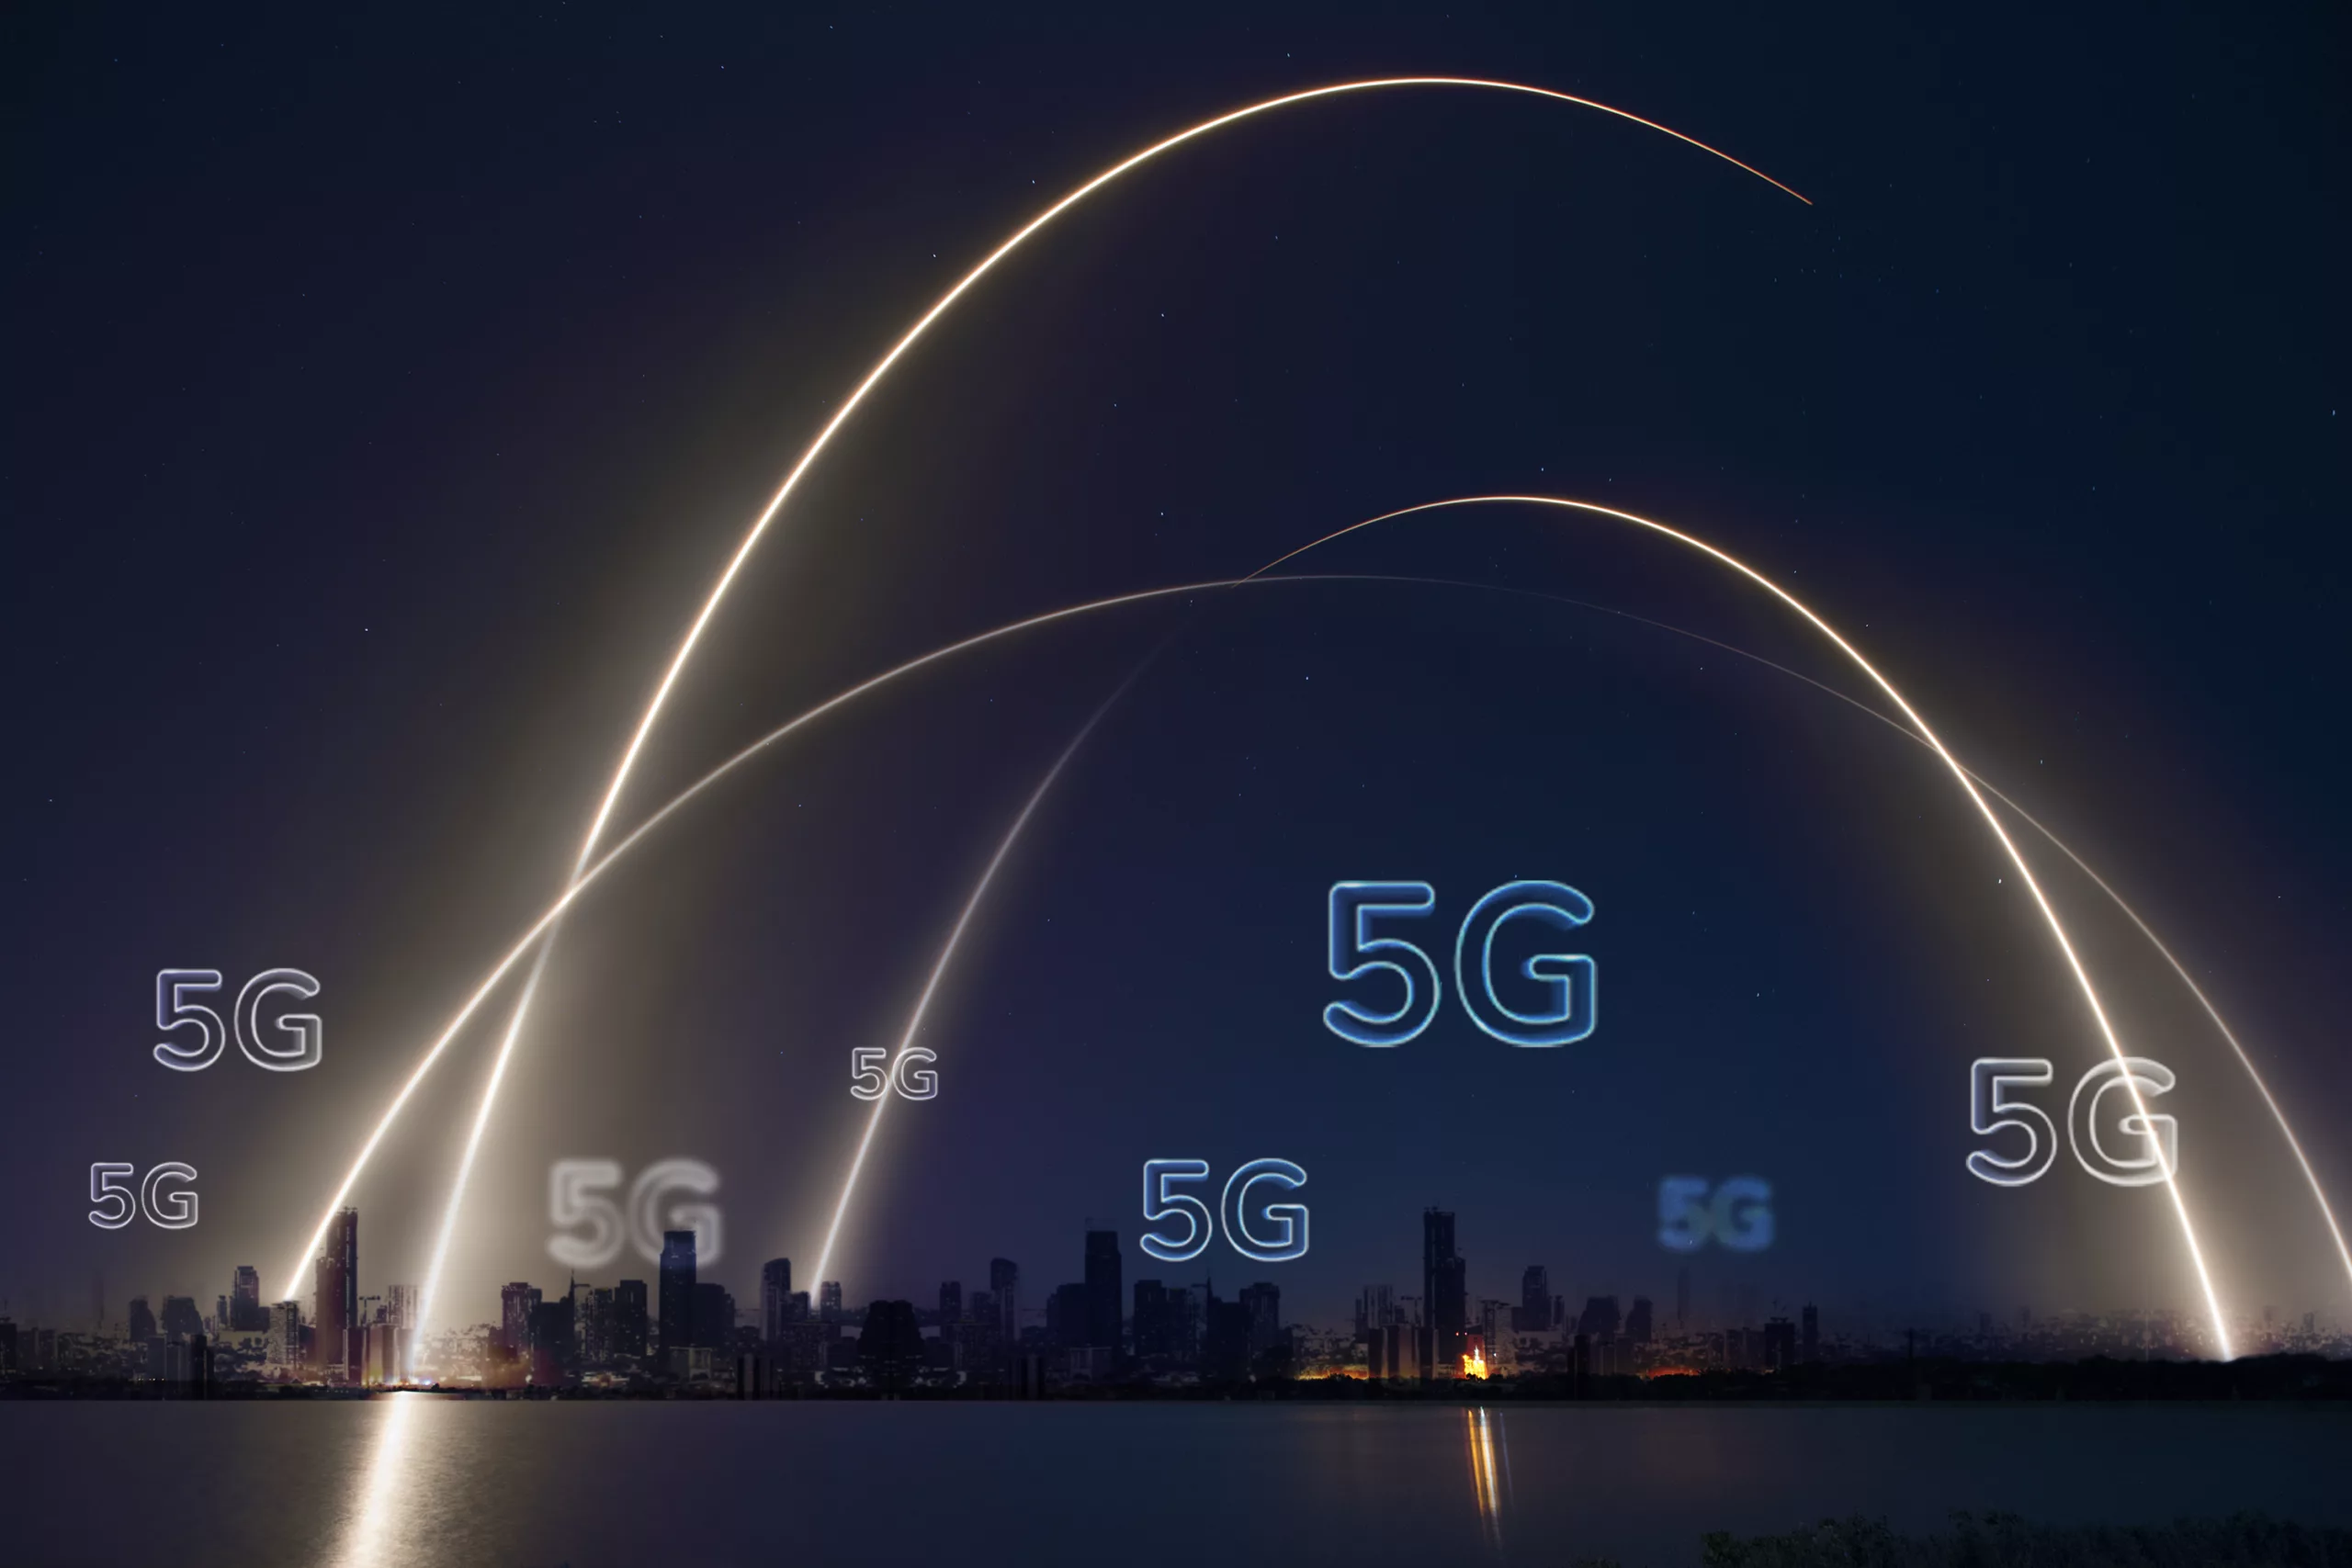 IoT in 5G Network